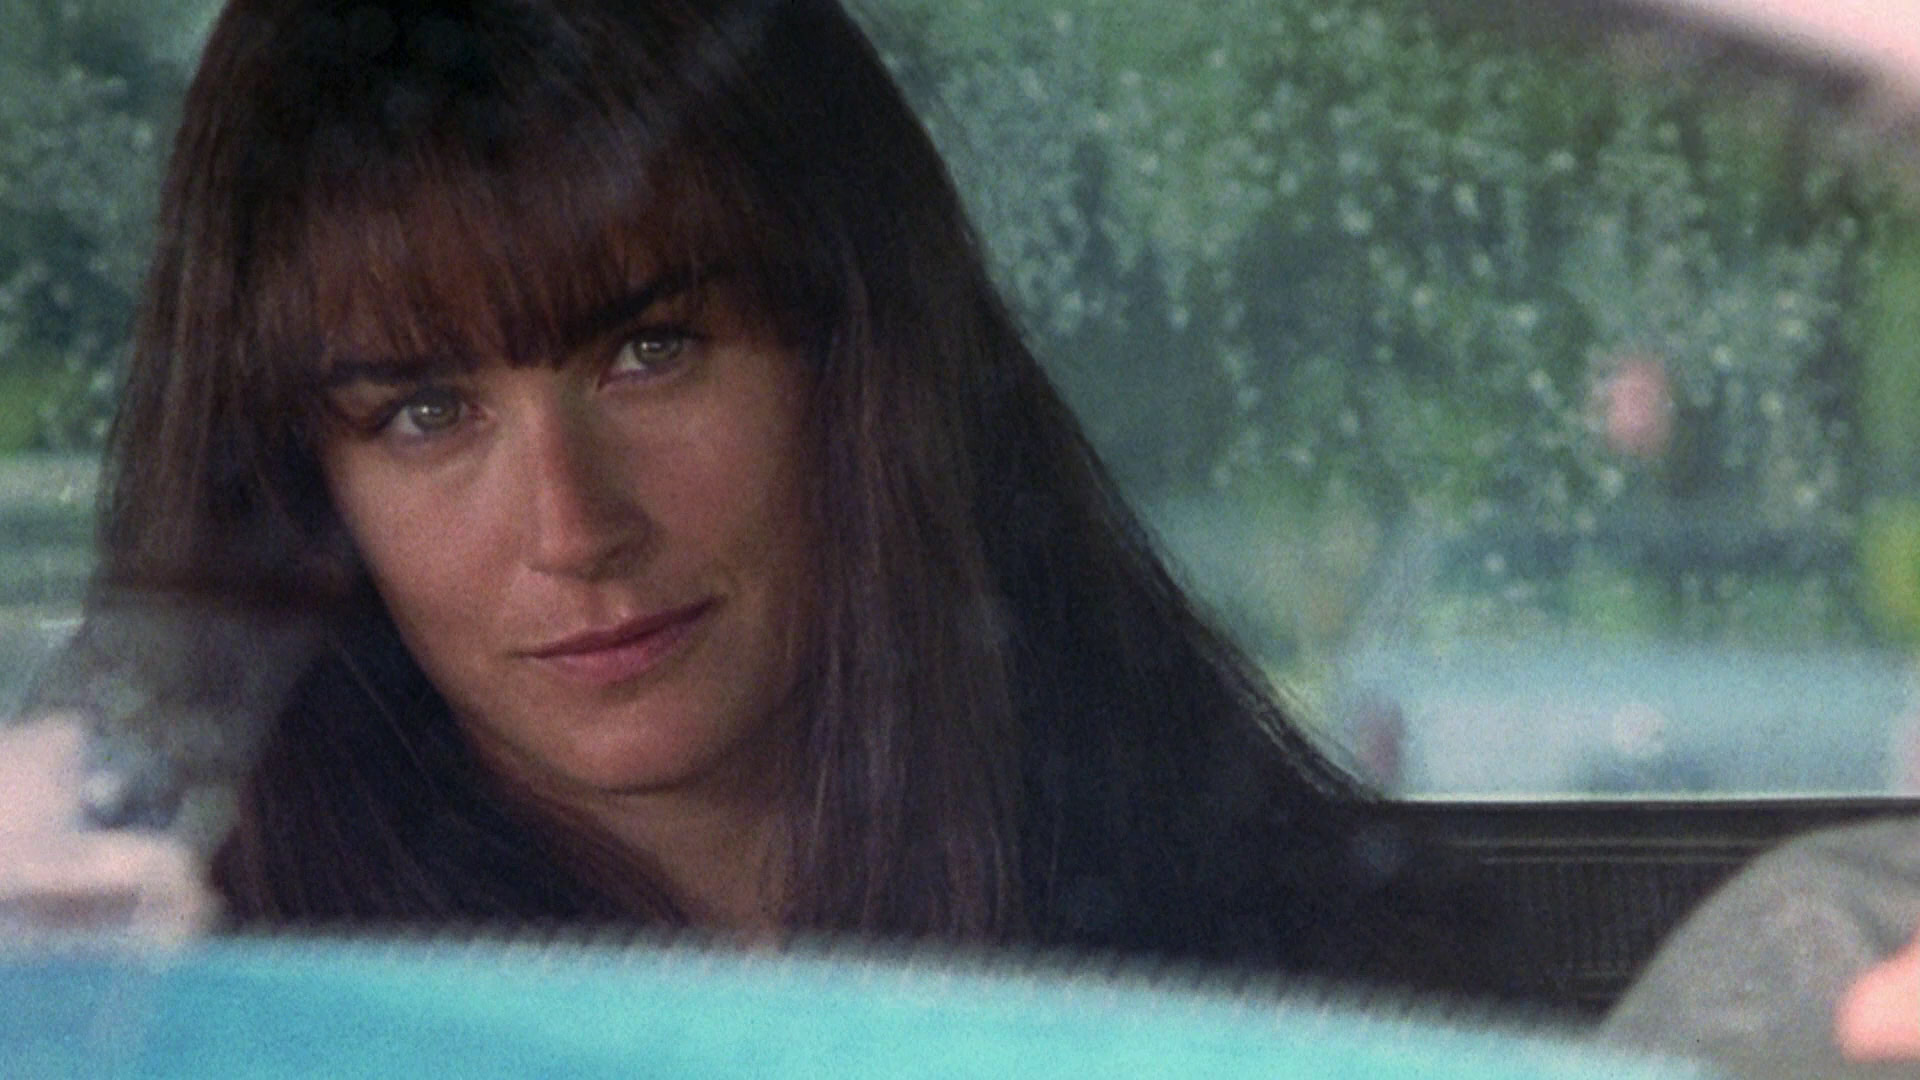 Demi Moore in Indecent Proposal